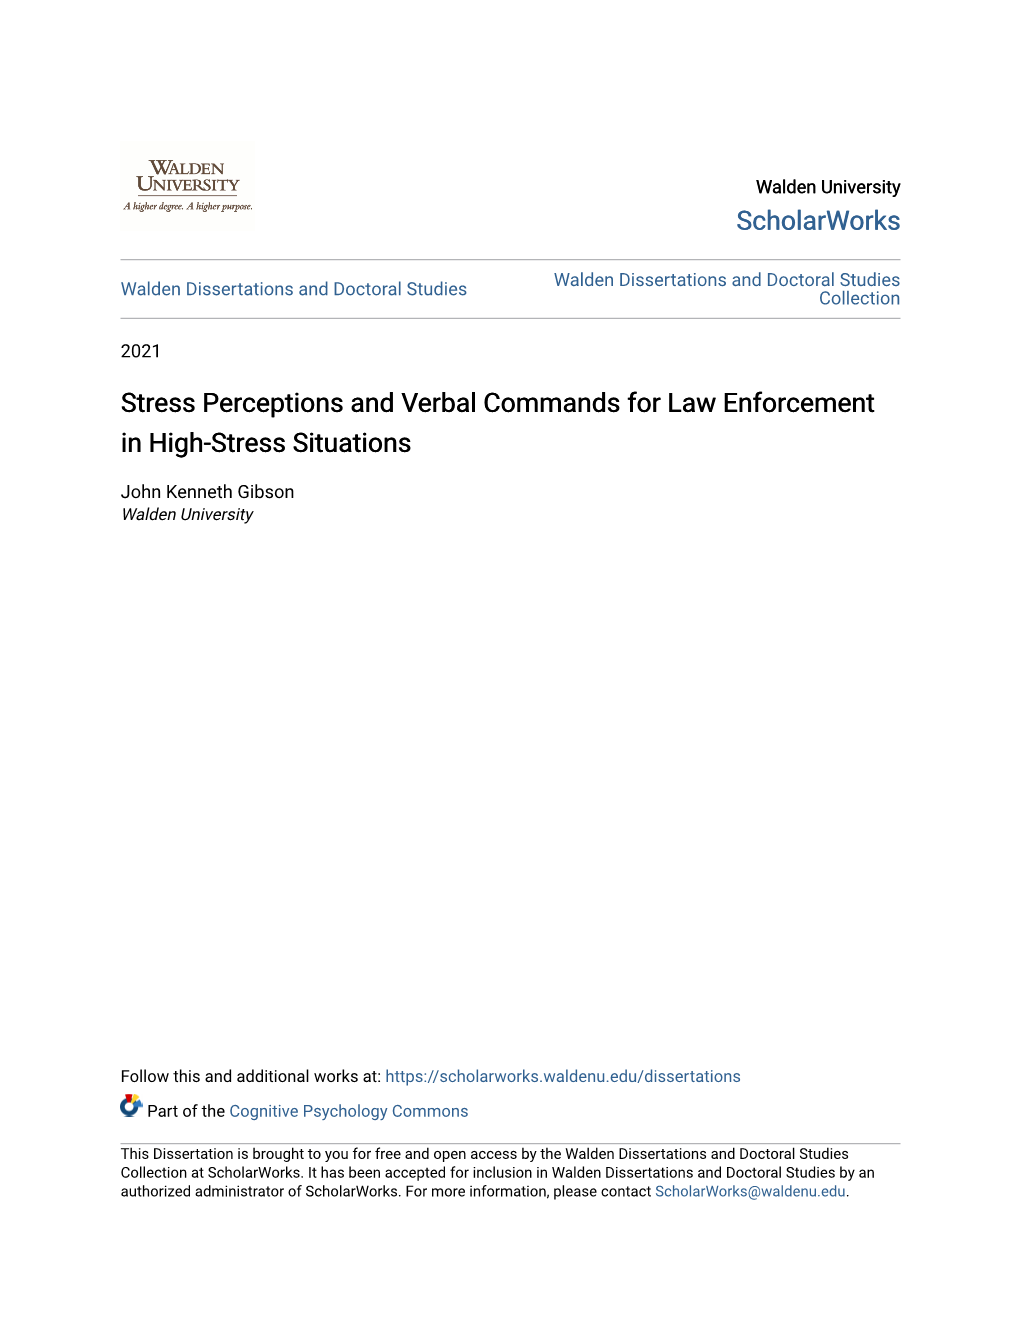 Stress Perceptions and Verbal Commands for Law Enforcement in High-Stress Situations